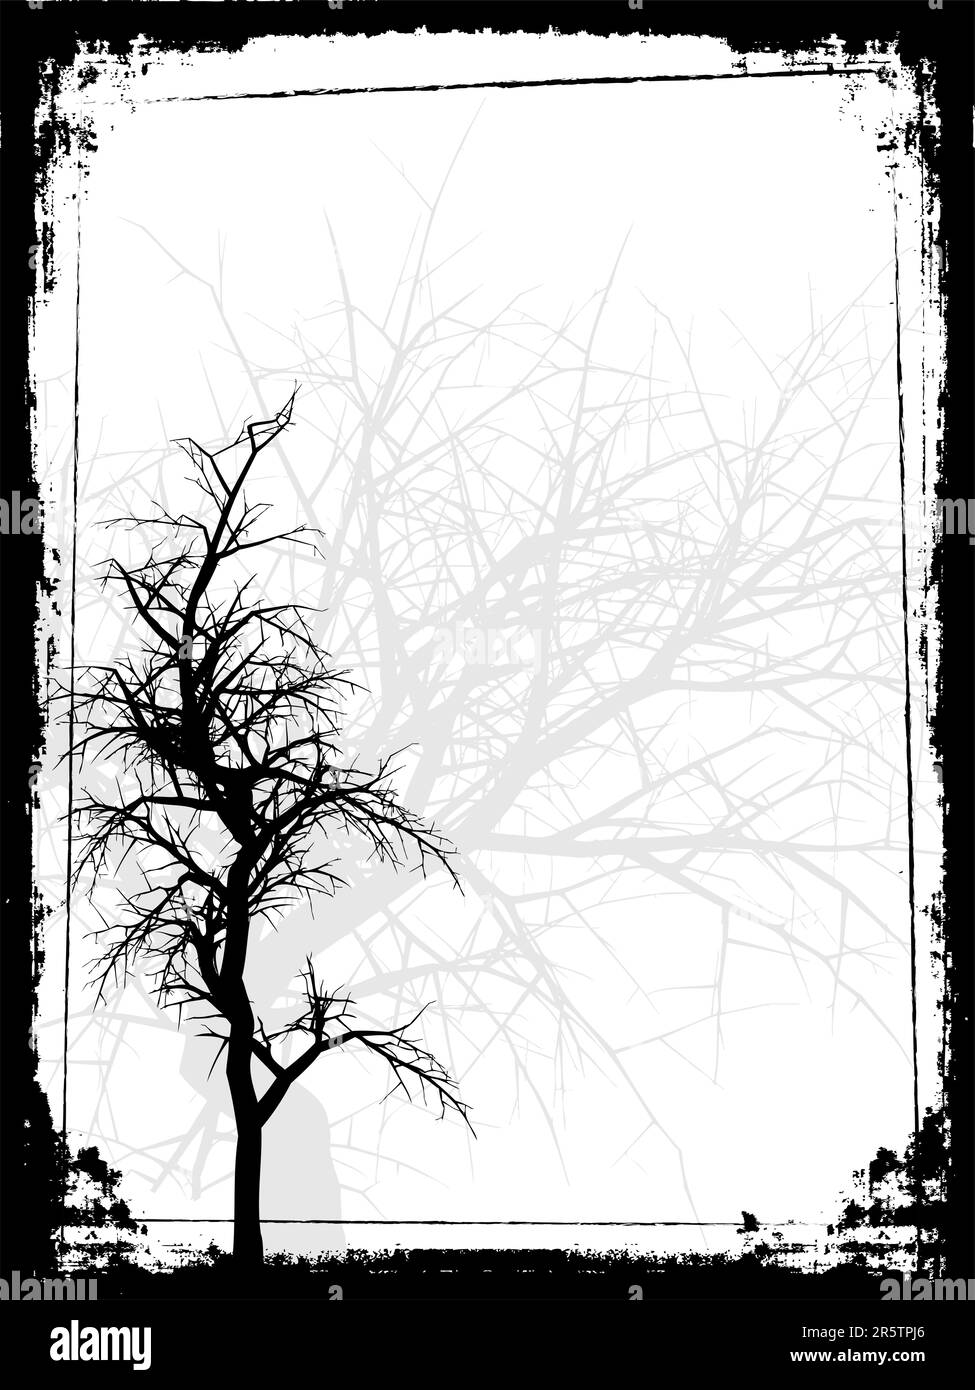 Silhouette of a winter tree on a grunge frame Stock Vector